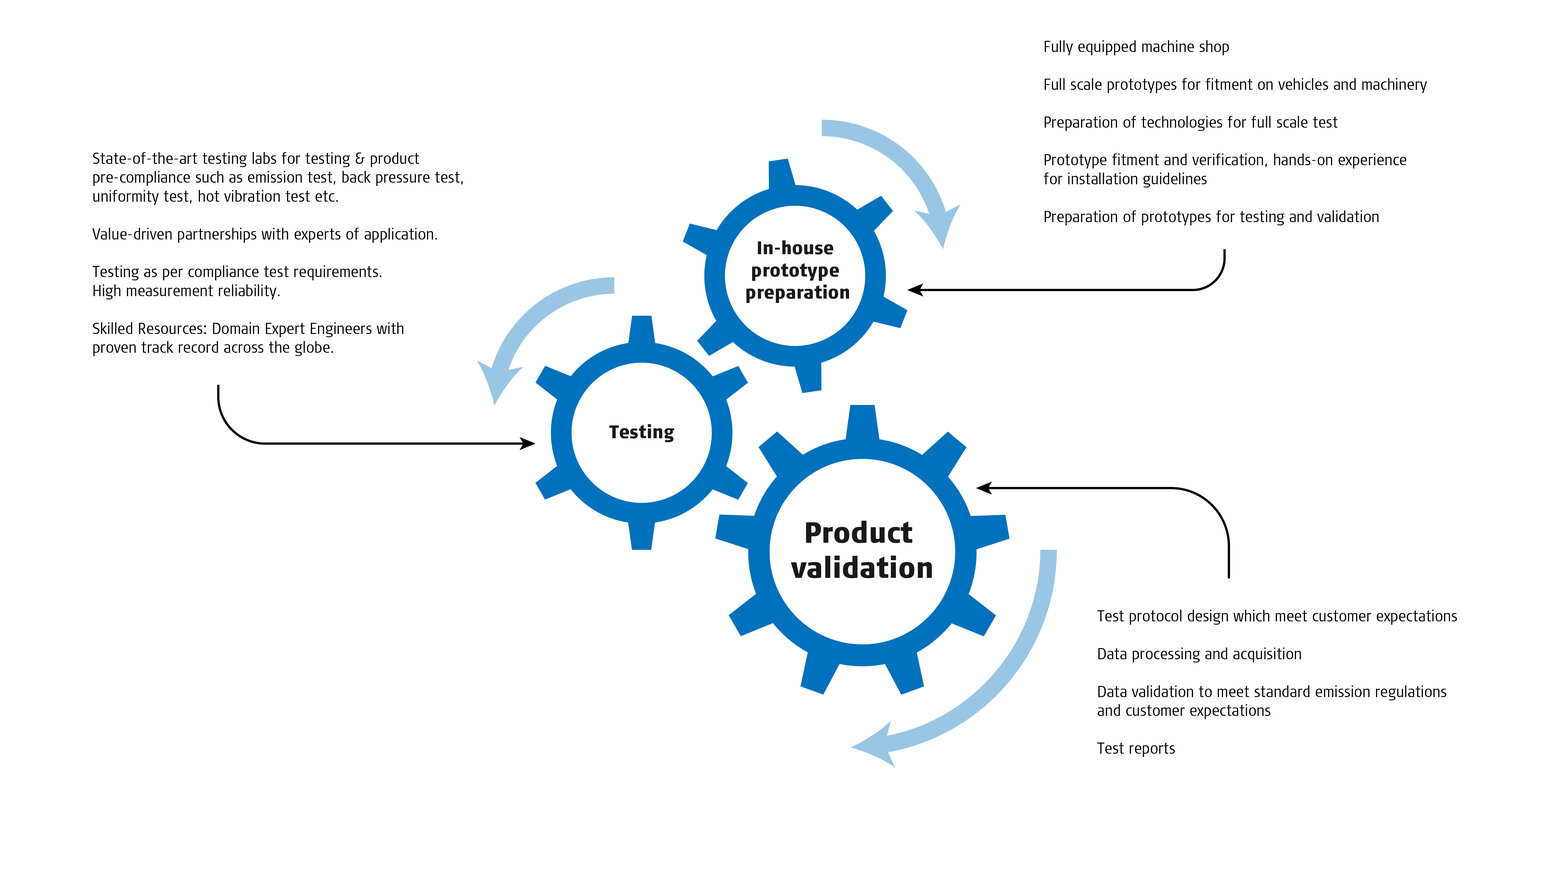 Chart elaborating on our testing, product validation, and in-house prototype preparation